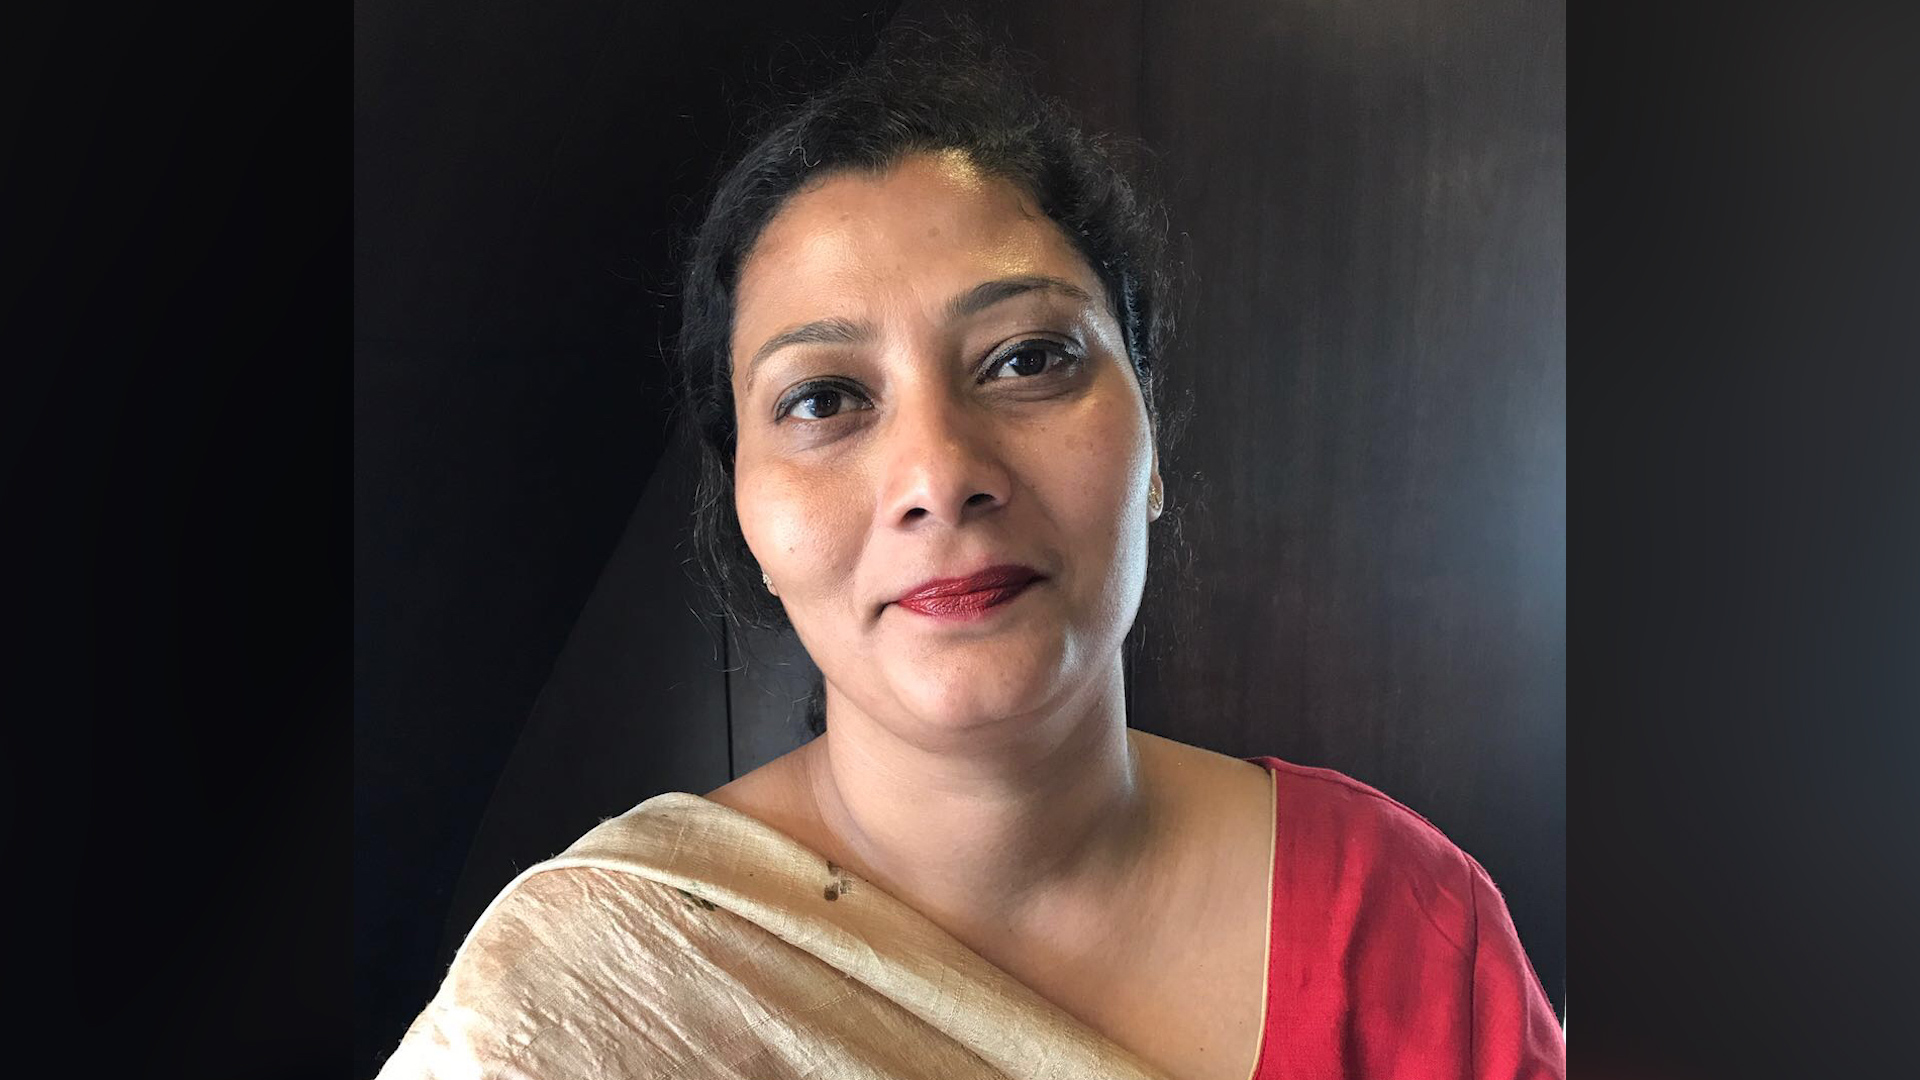 Act Rachana Banerji Xxx Real And Original - An Indian journalist has been trolled for years. Now U.N. experts say her  life could be at risk. - The Washington Post